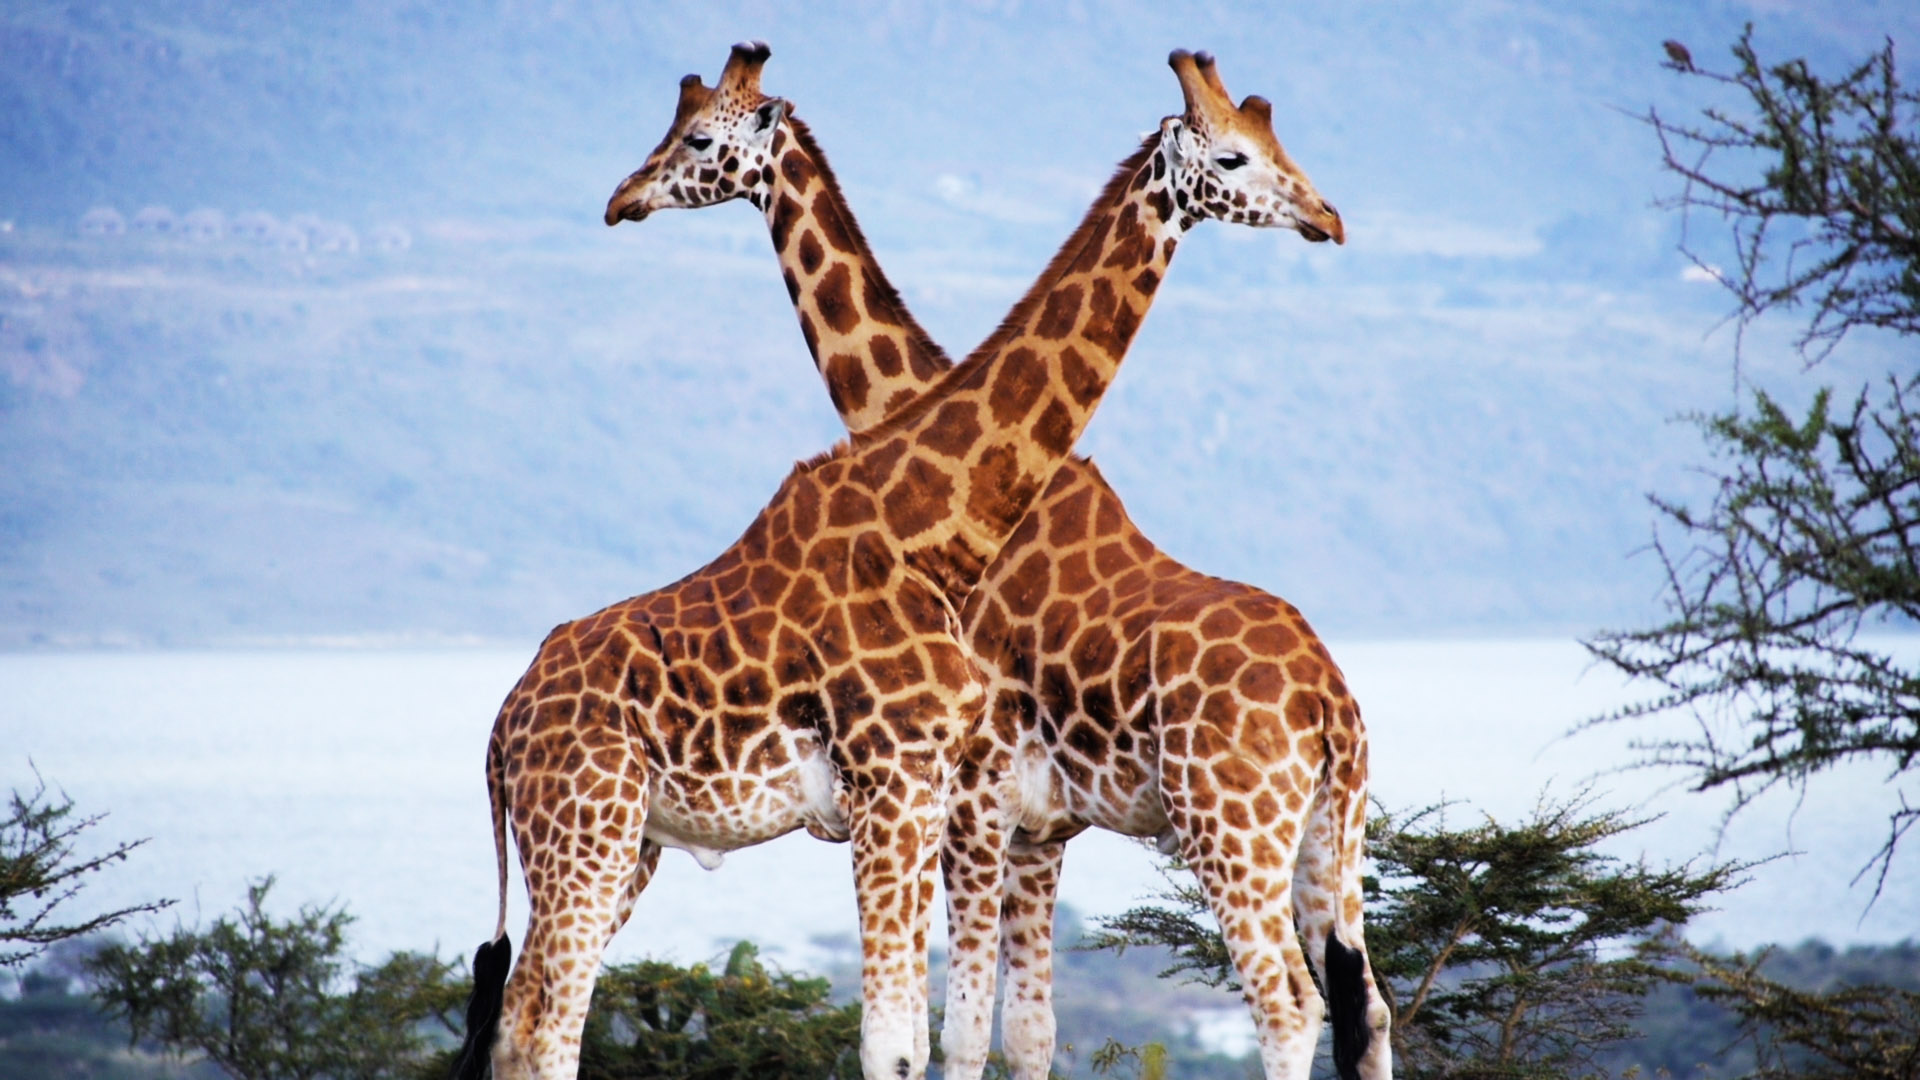 Can Ranching Save Giraffes? - Mission Critical Video - National ...